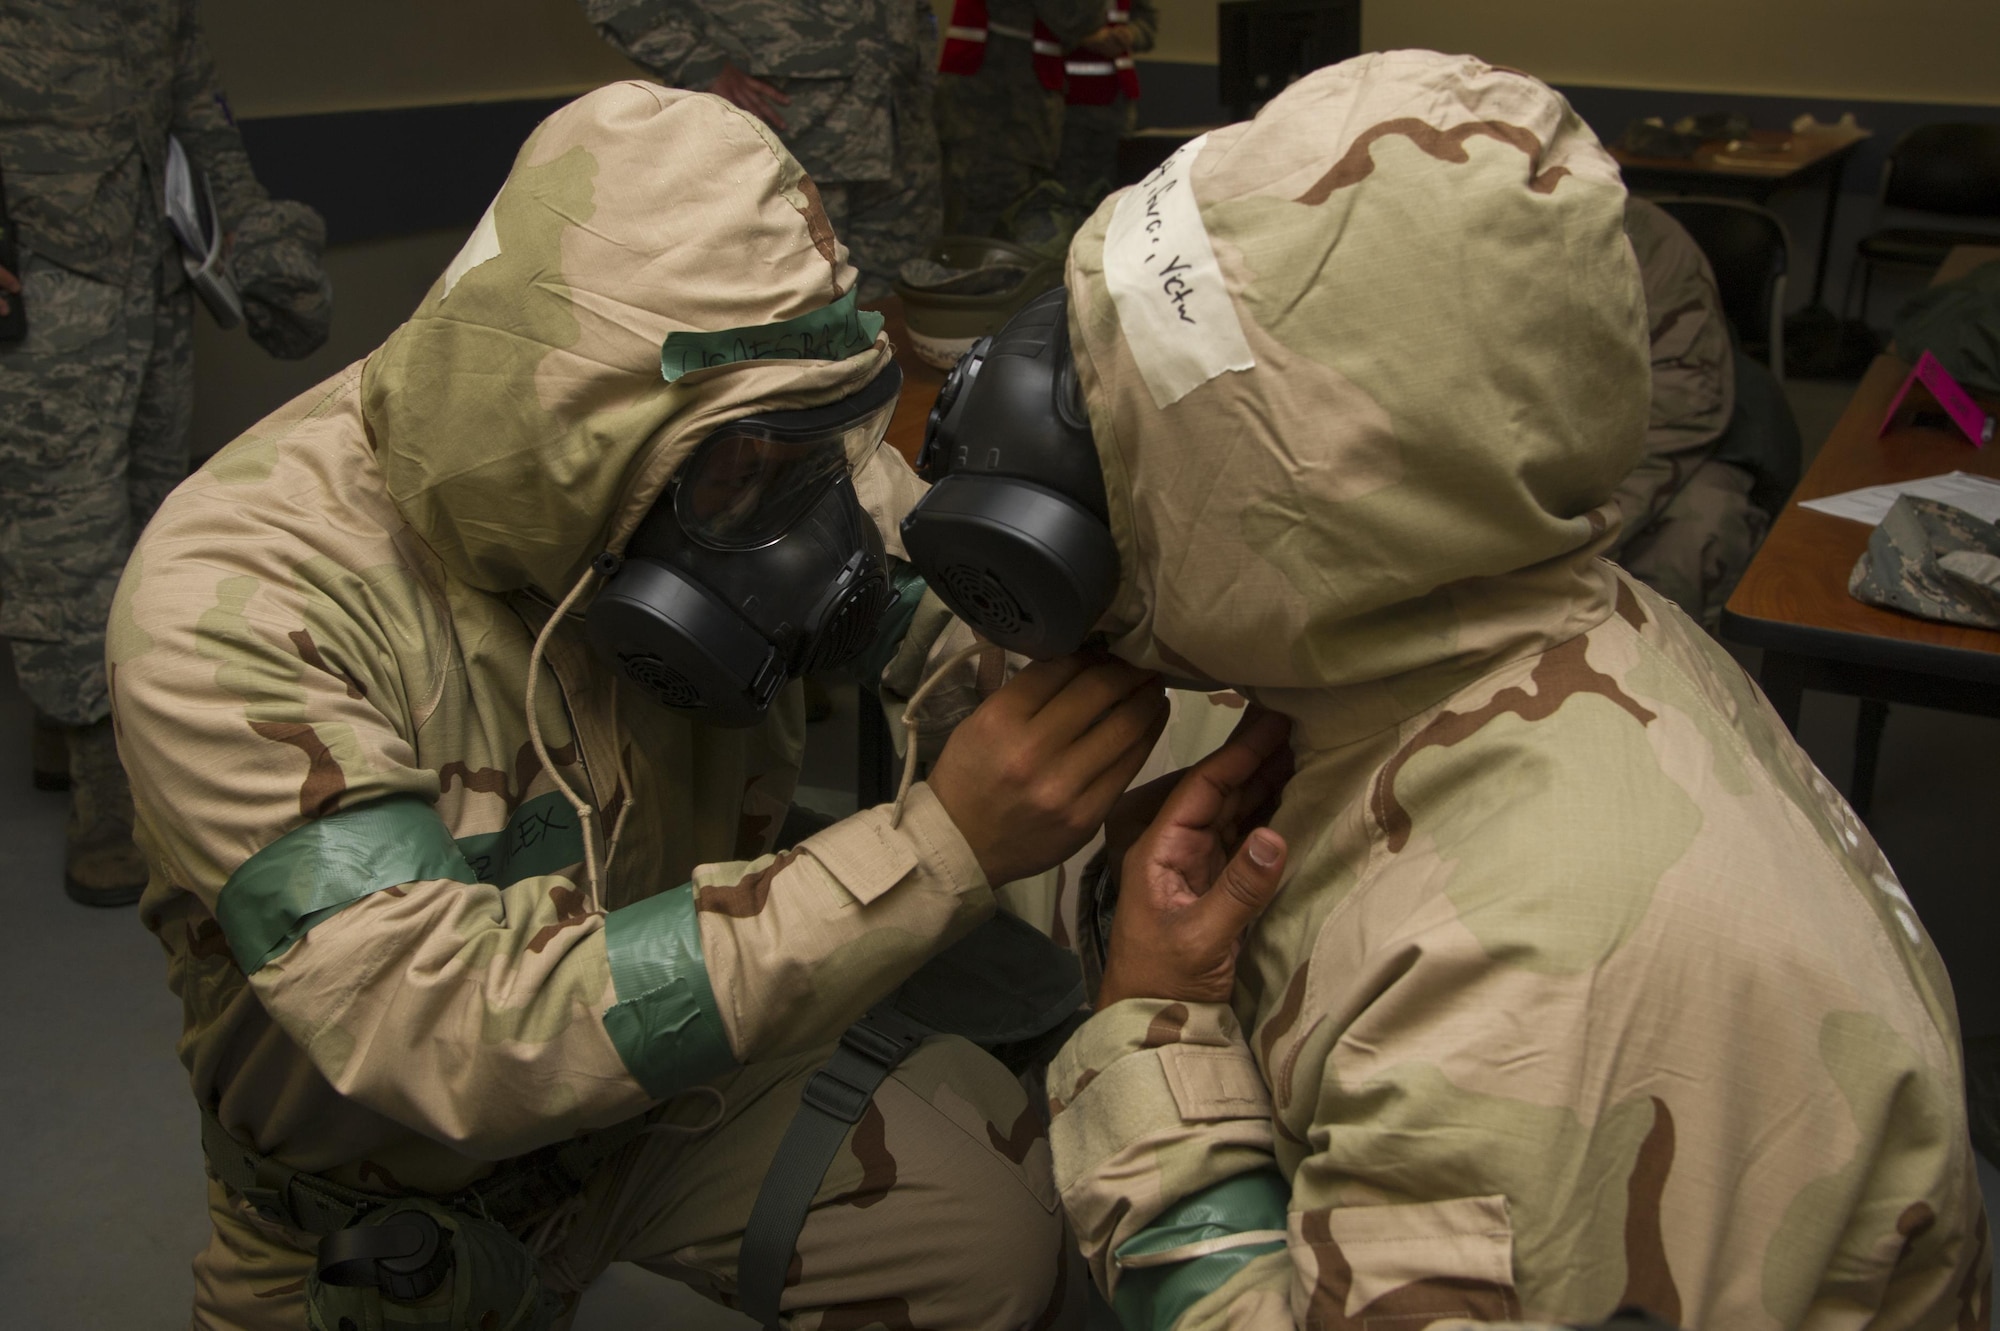 Senior Airman Alex Lopez checks Staff Sgt. Victor Garcia’s gas mask and hood during an exercise Nov. 4 at Beale Air Force Base. Squadron. Both Airmen, assigned to the 940th Force Support Squadron, practiced readiness skills in the Ability to Survive and Operate exercise. (U.S. Air Force photo by Senior Airman Tara R. Abrahams)